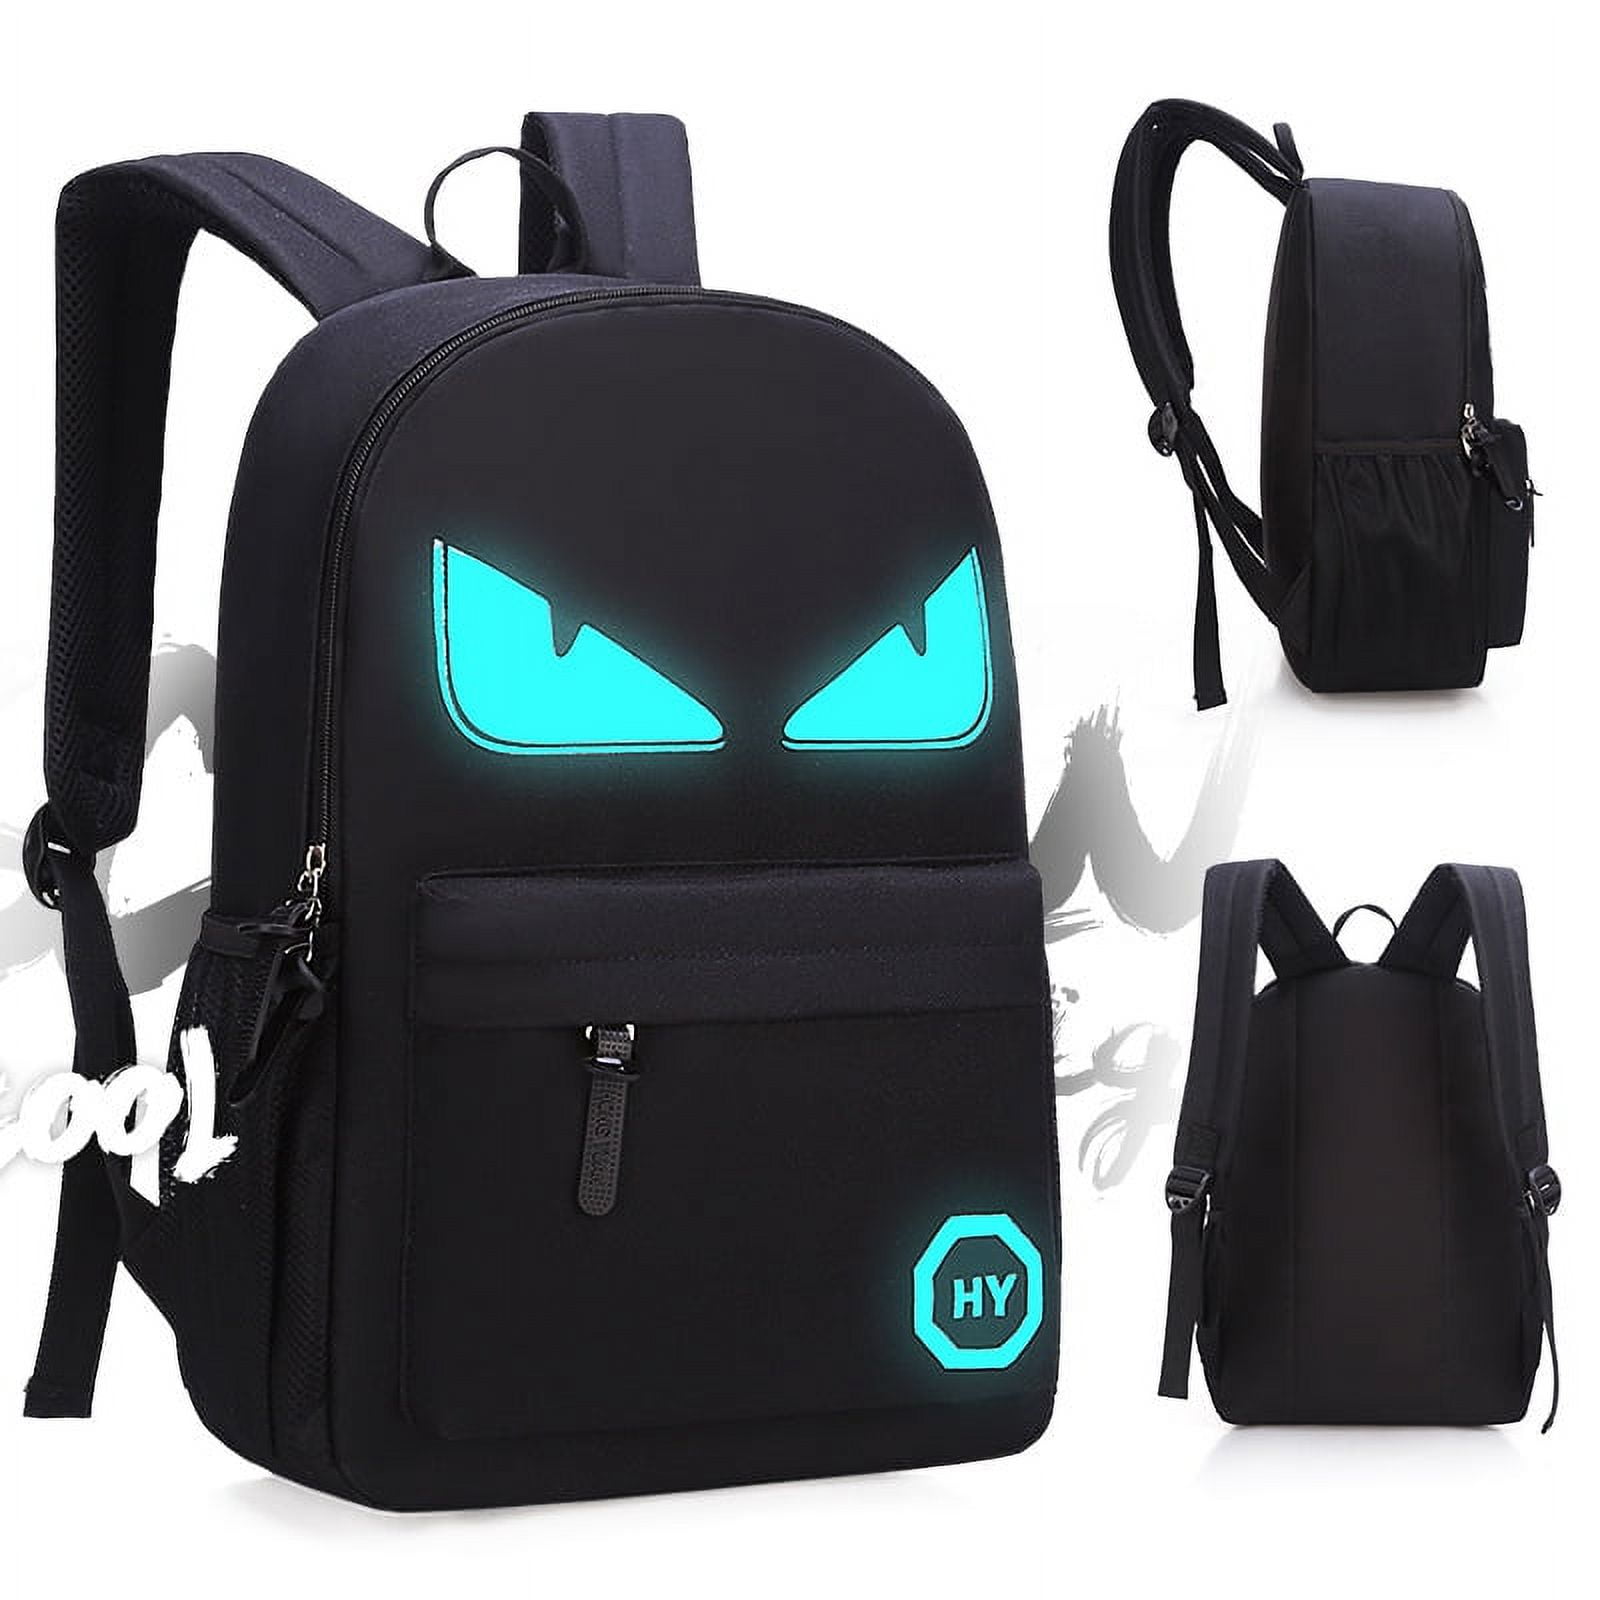 Luminous Glow In Dark Cool Boys School Backpack, Black Color, Large Size,  11.5(L) x 6.7(W) x 18.9(H) inches (Powerbank Not Included)